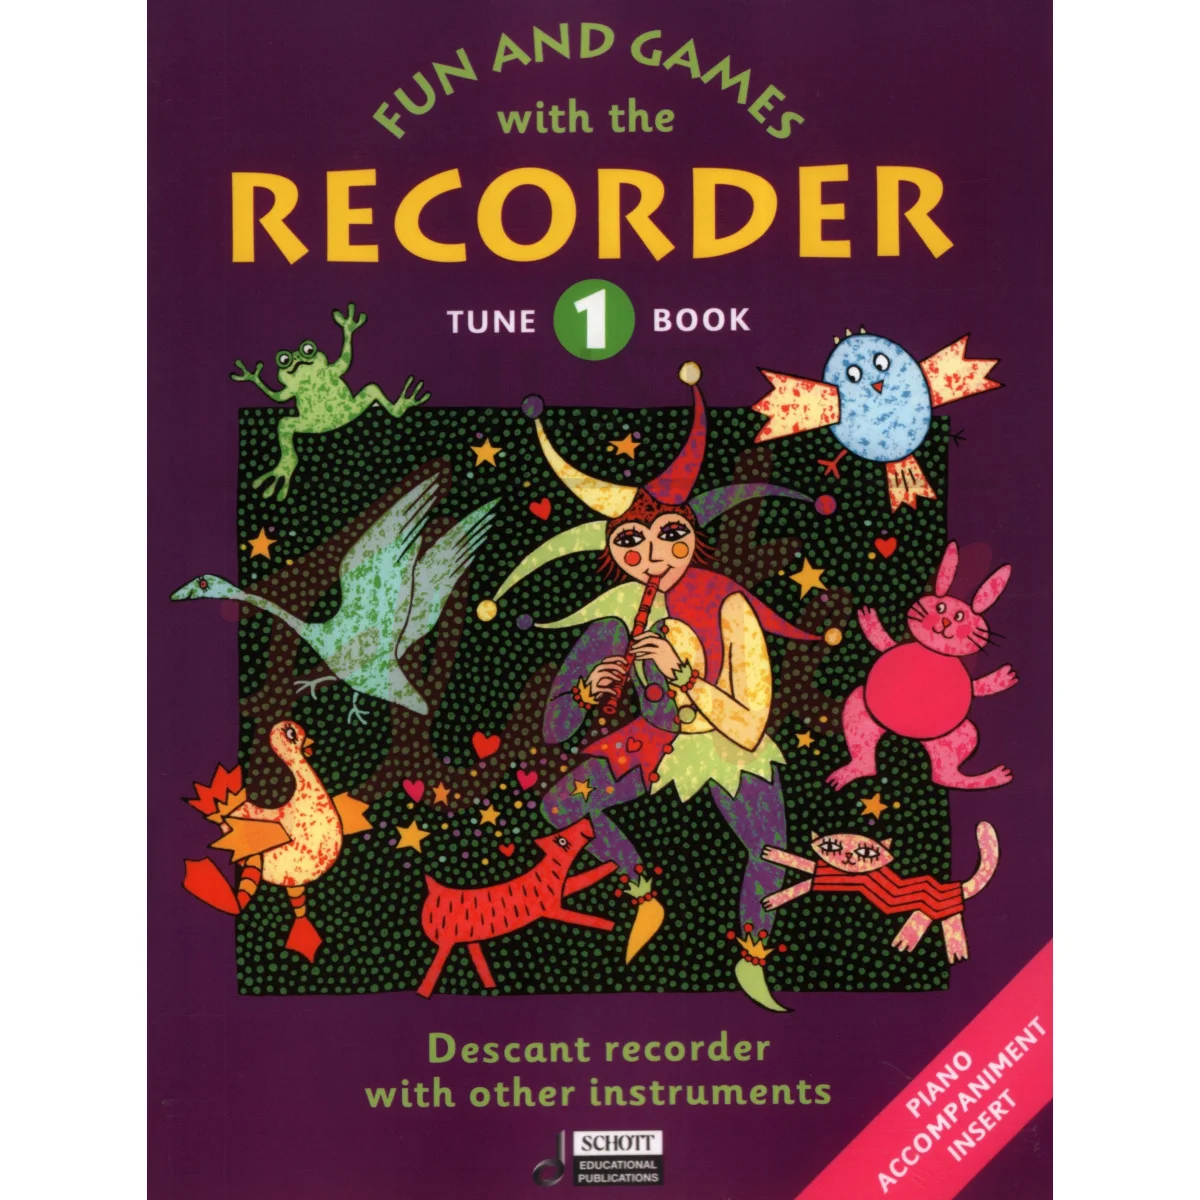 Fun and Games with the Recorder Tune Book 1 [Descant Recorder]